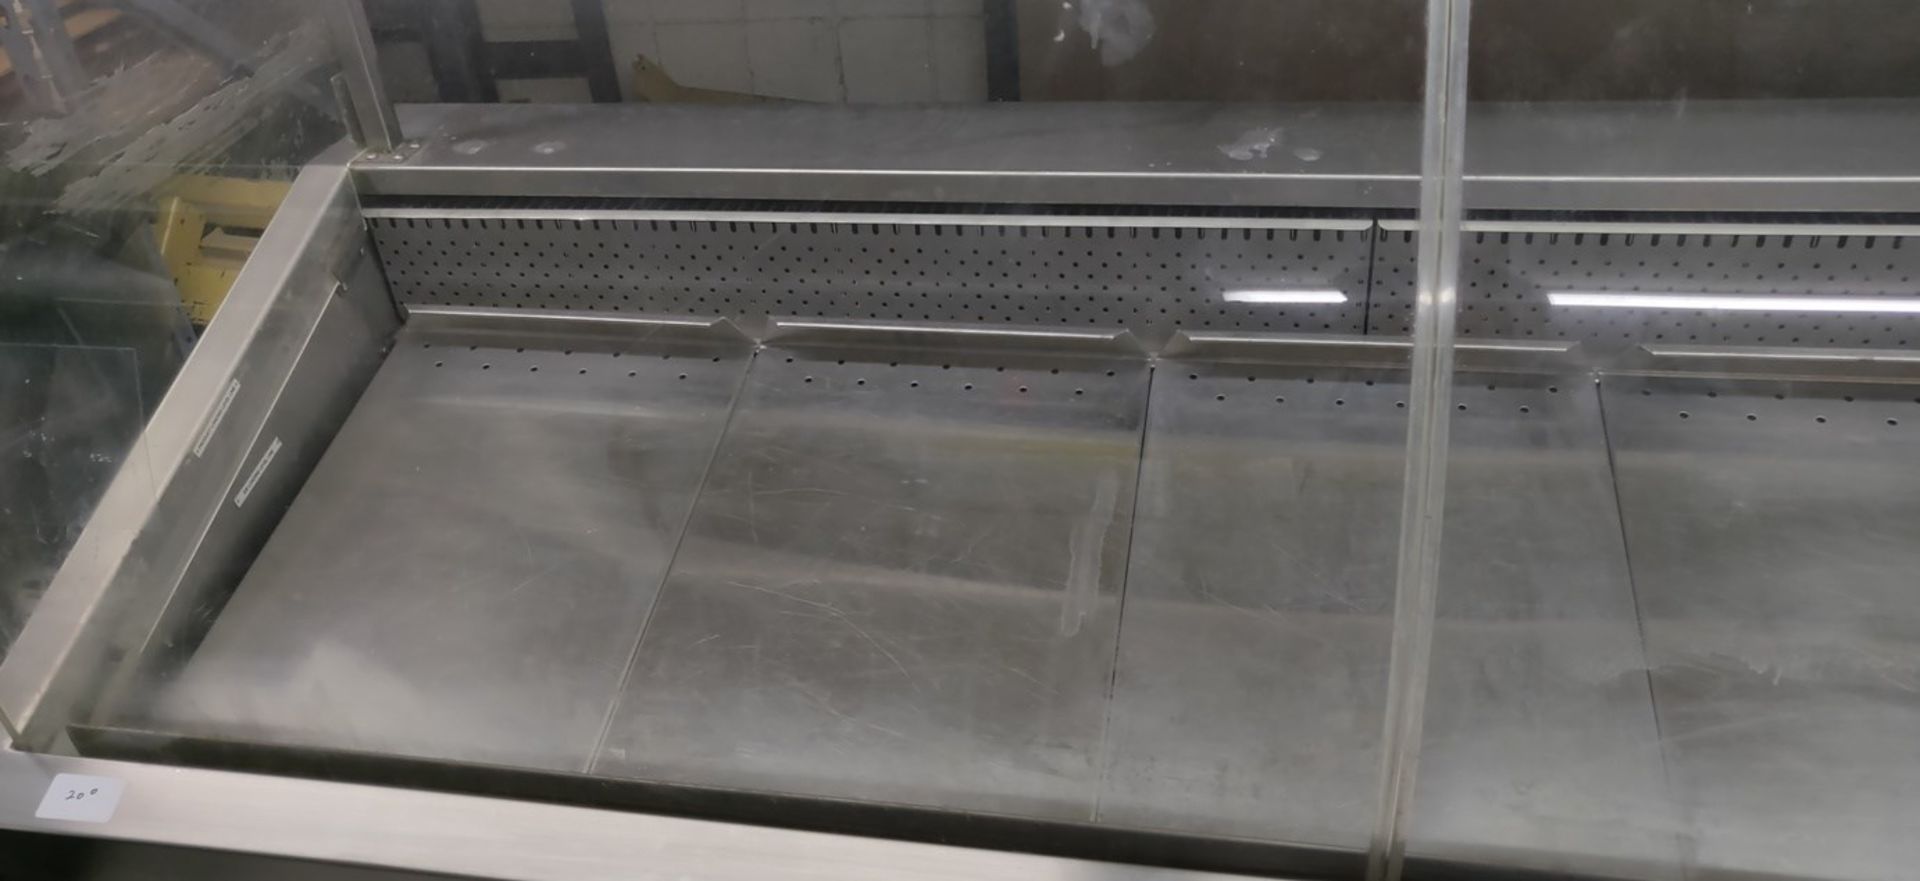 TRAULSEN GLASS SEAFOOD DISPLAY CASE (APPROX 72" L x 58" H x 36" D) - Image 6 of 6